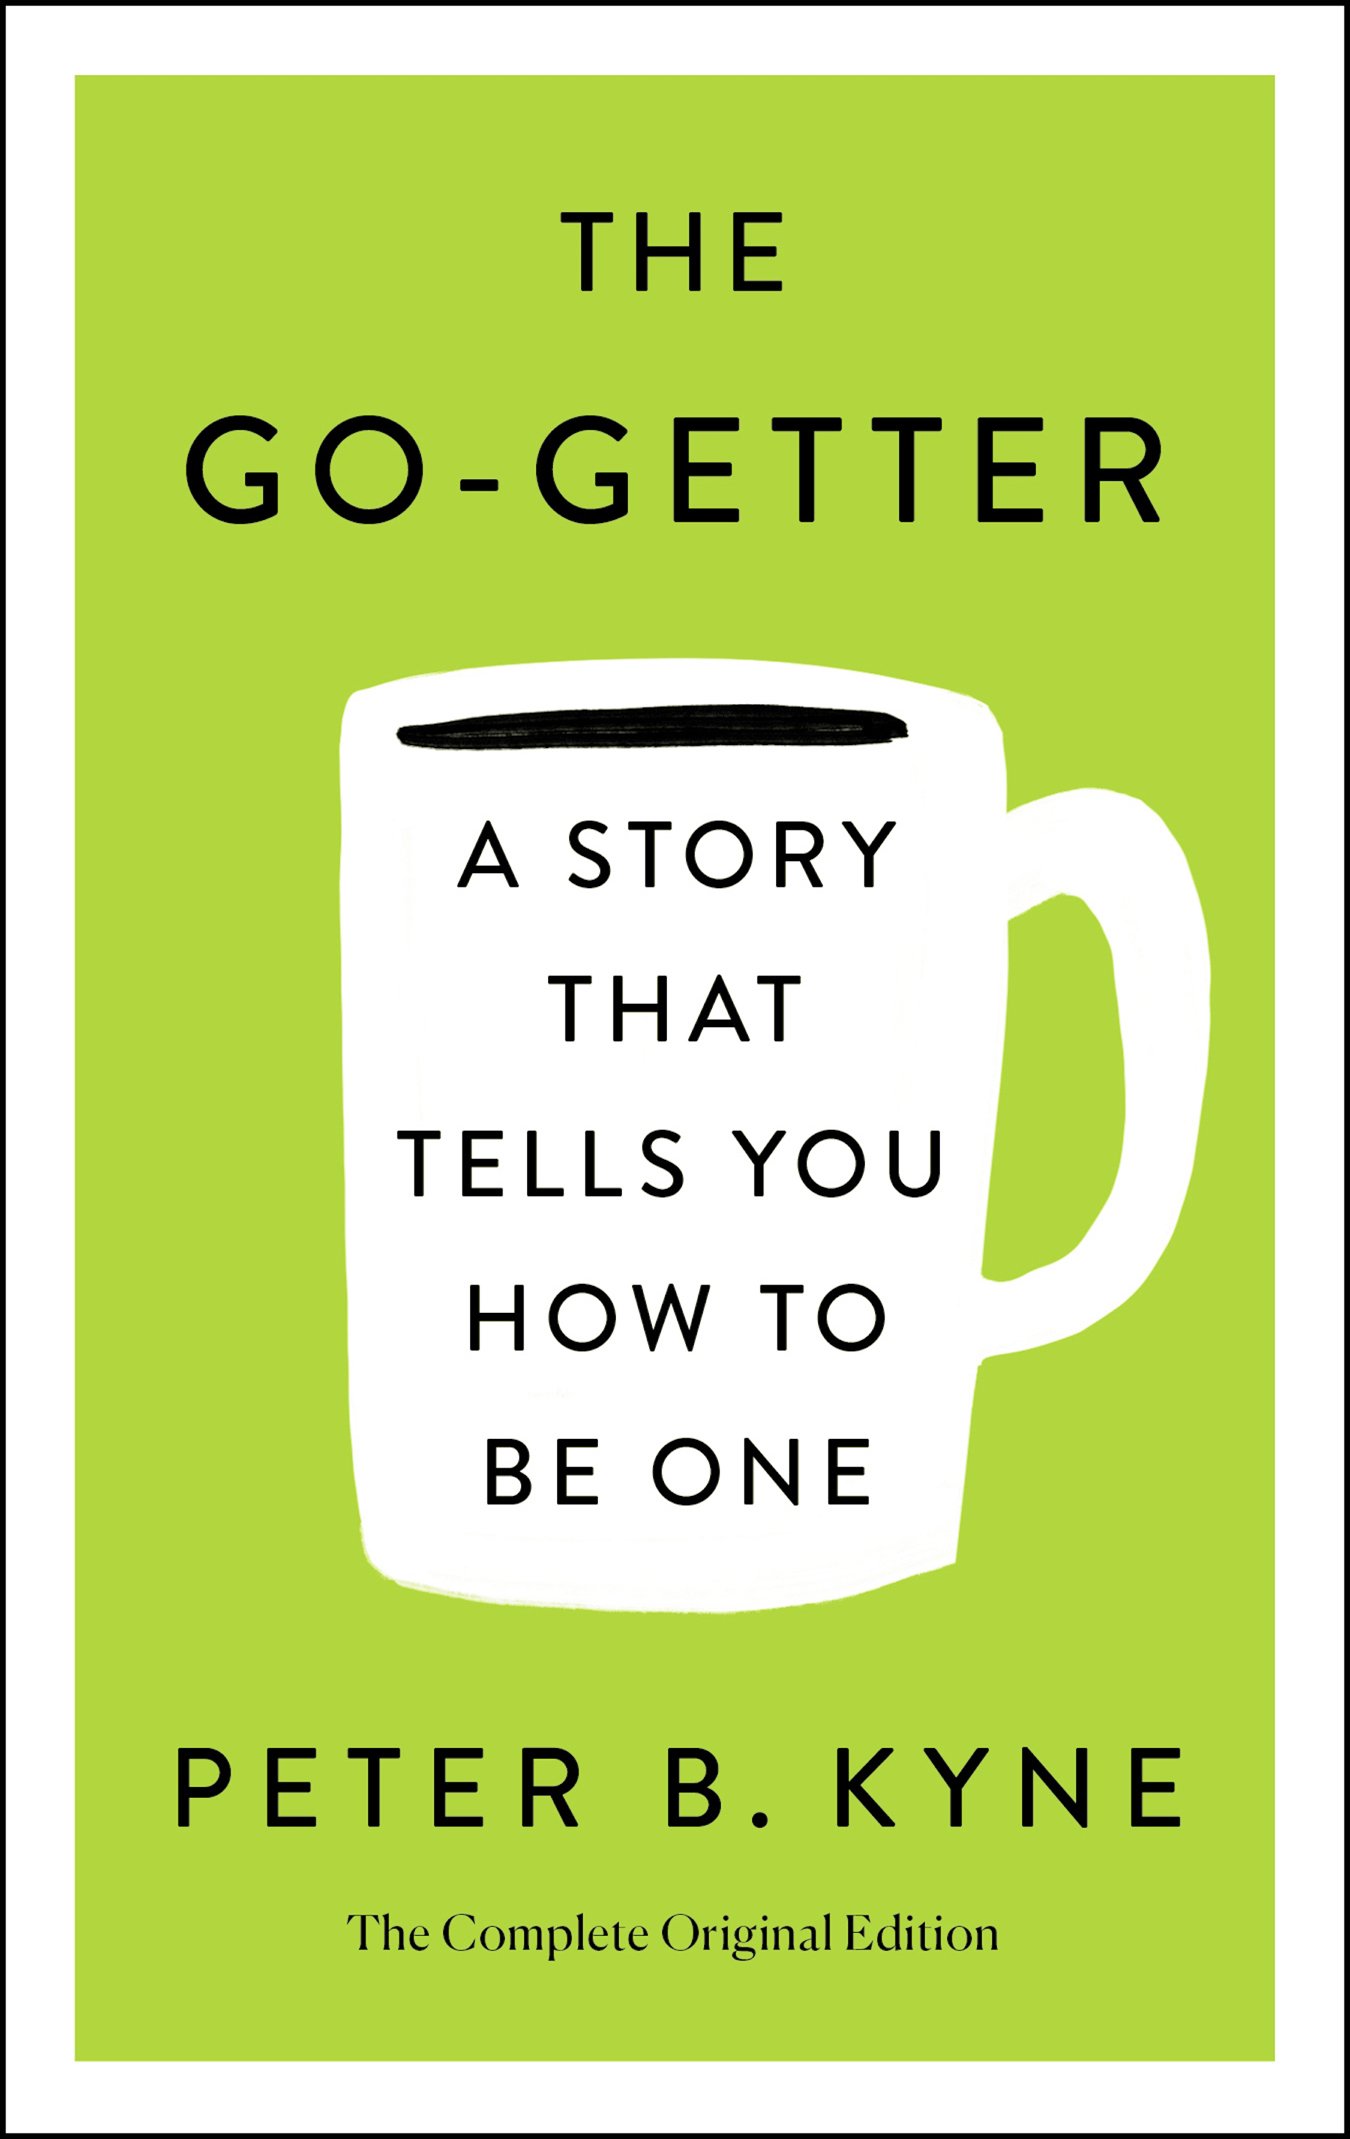 monday belongs to the go getters